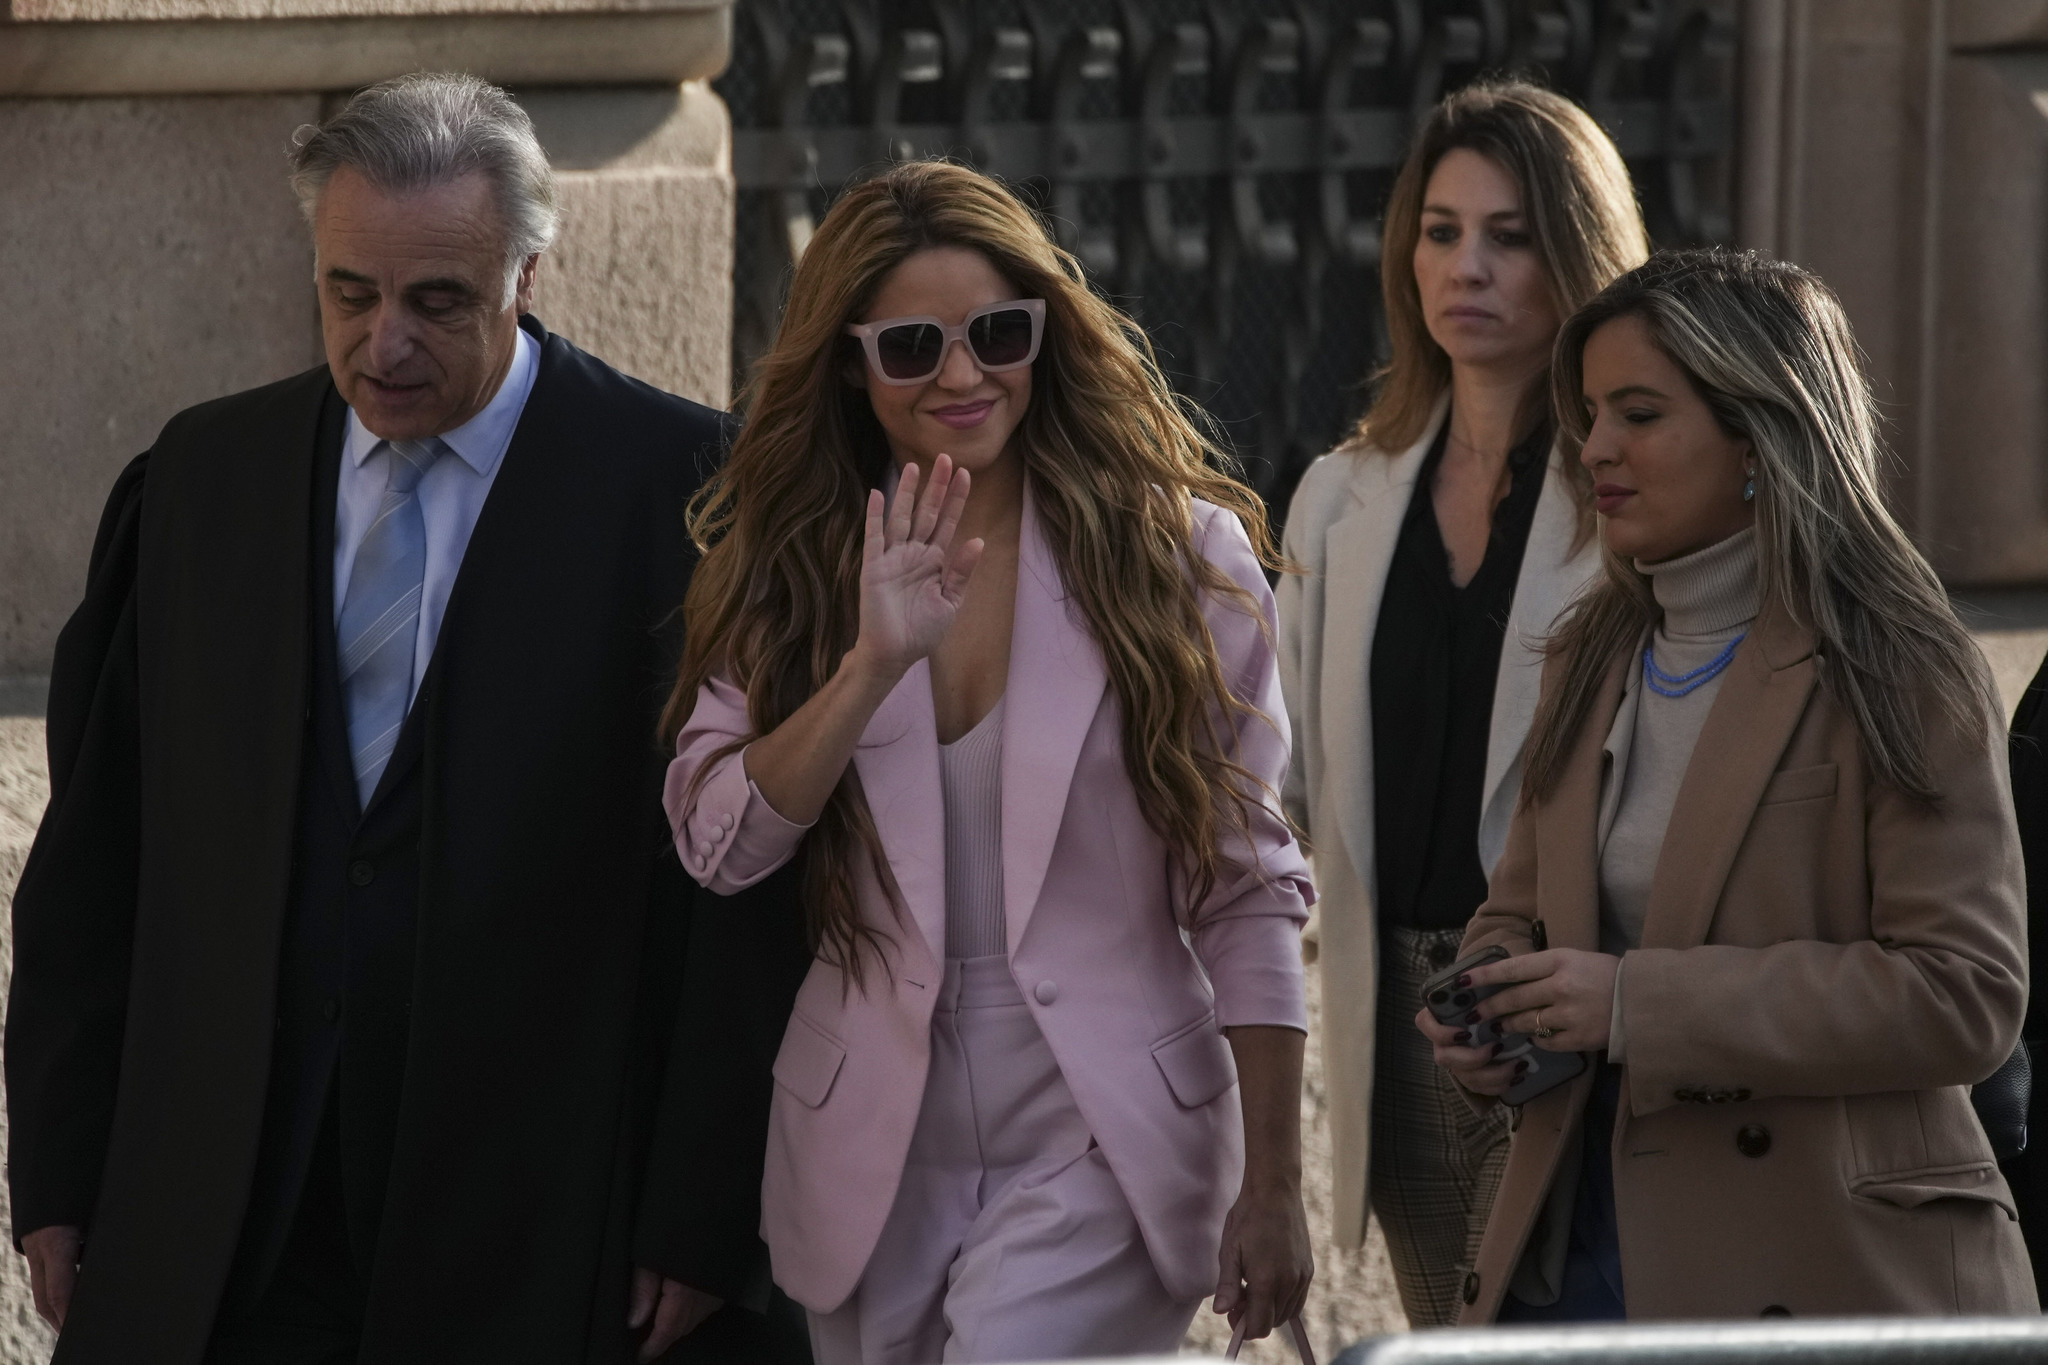 Colombian performer Shakira, center, arrives at court in Barcelona, Spain, Monday.